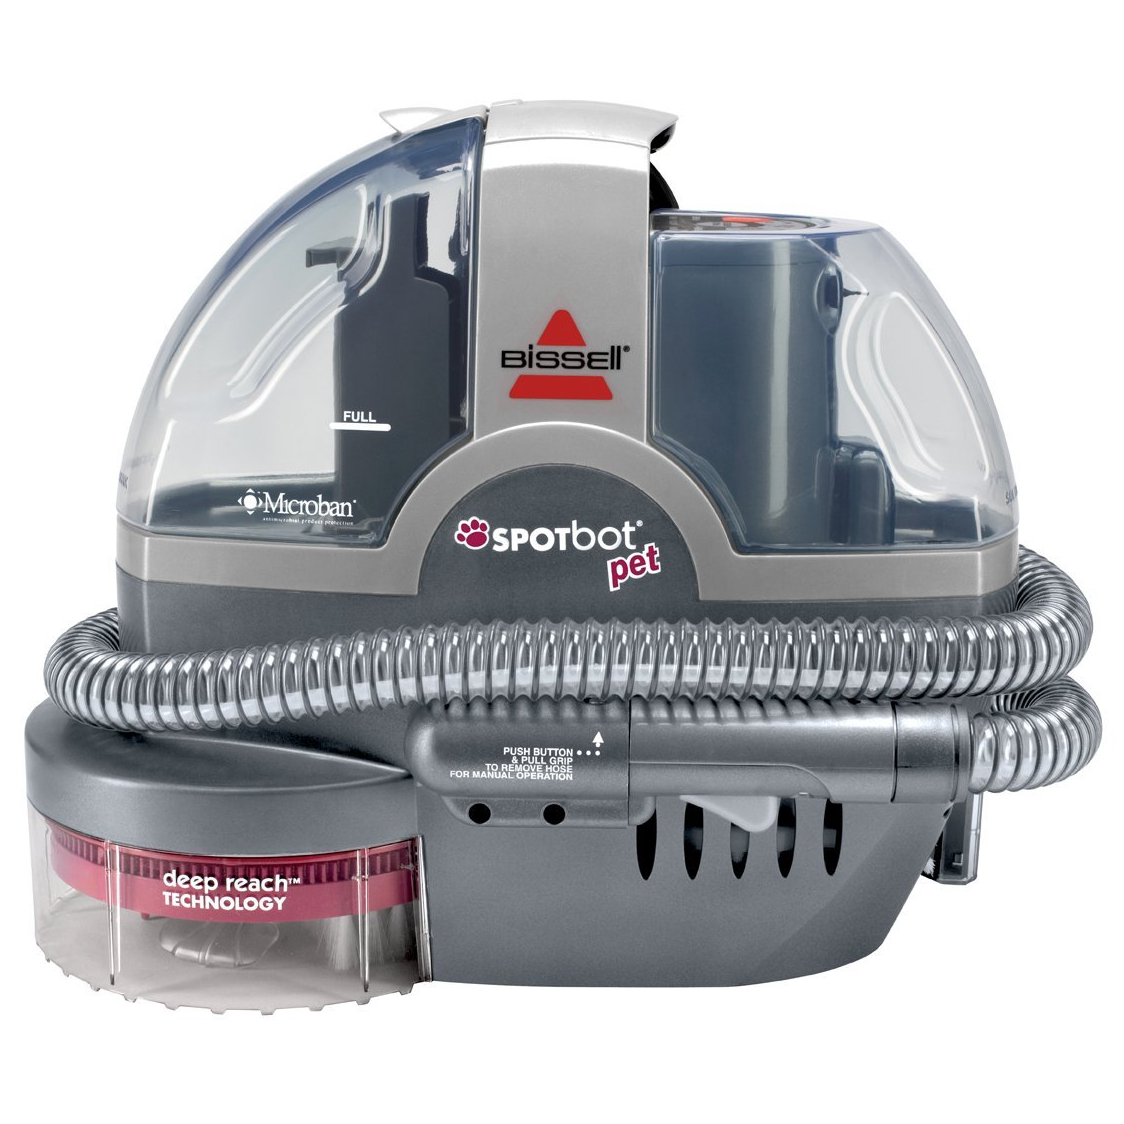 Amazon: Bissell Spotbot Pet Handsfree Spot and Stain Cleaner Only $109.99! (Reg $199.99)